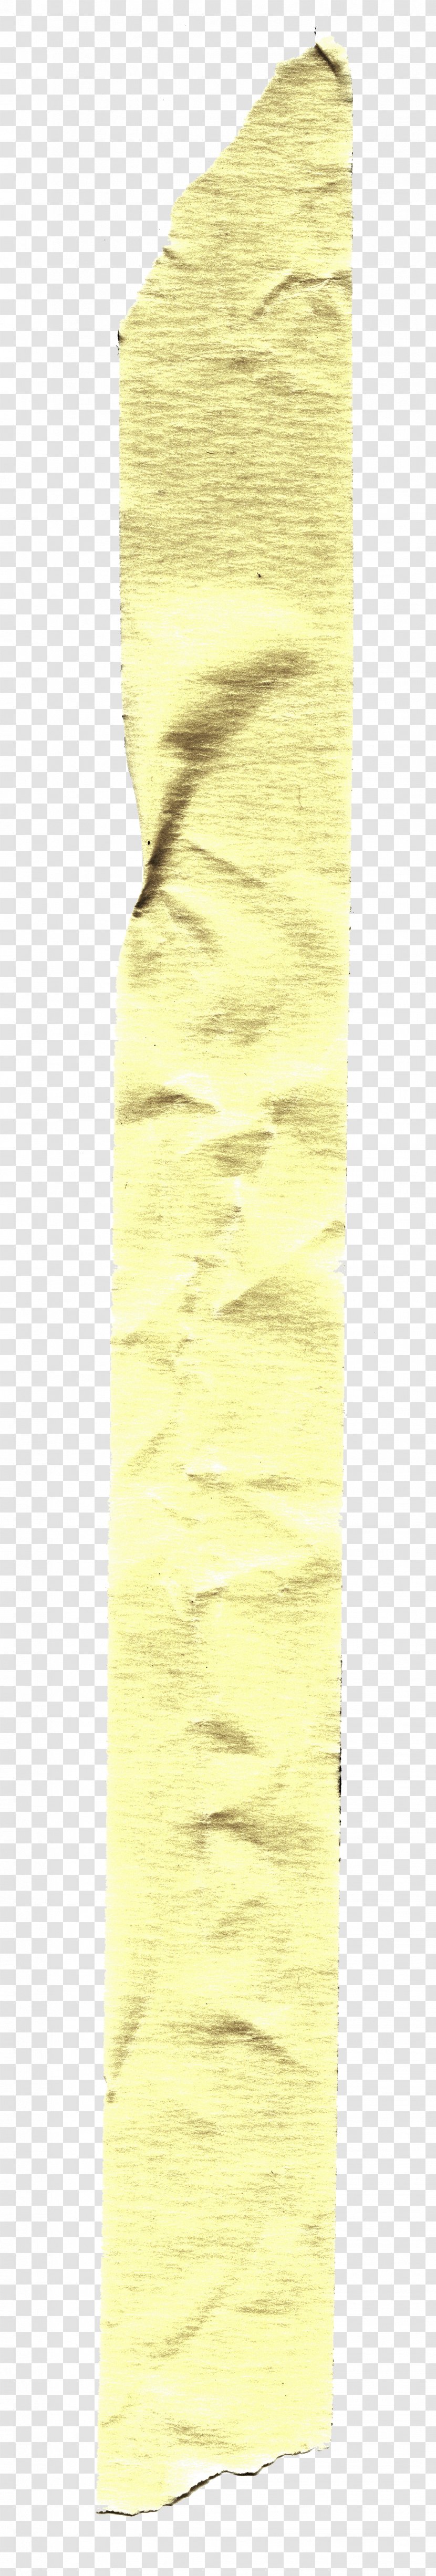 Silk Material - Yellow - Garbage Truck Transparent PNG